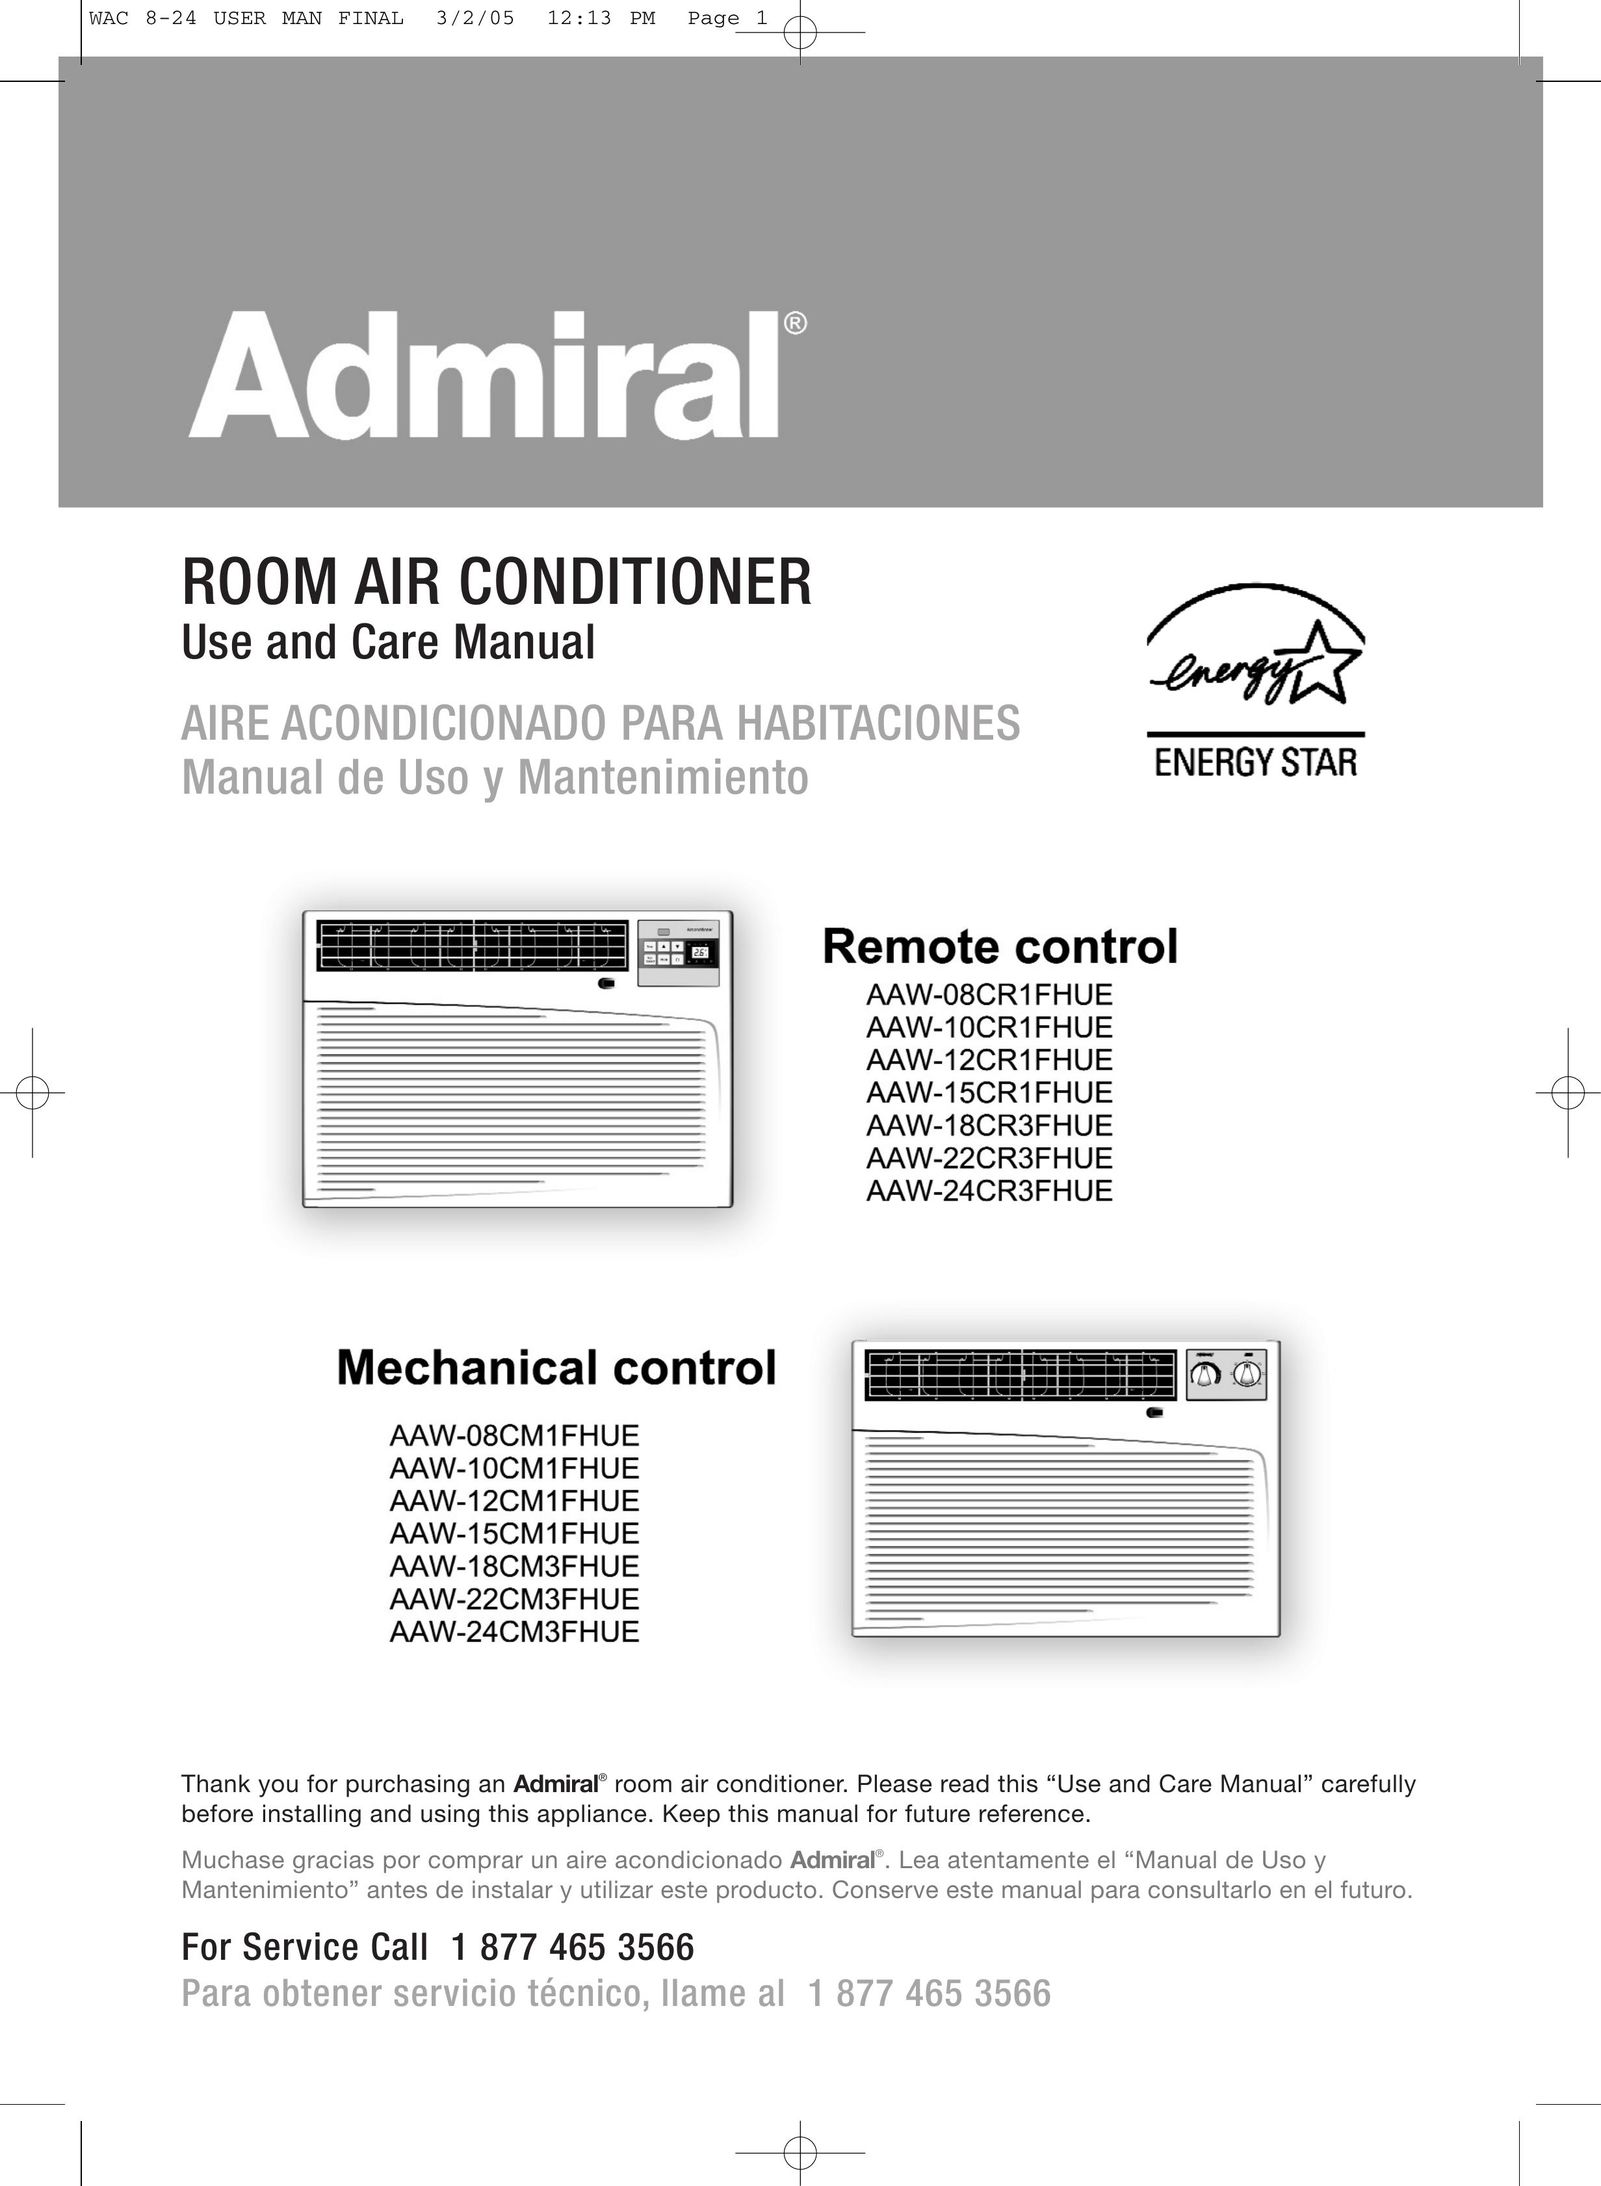 Admiral AAW-18CM1FHUE Air Conditioner User Manual (Page 1)